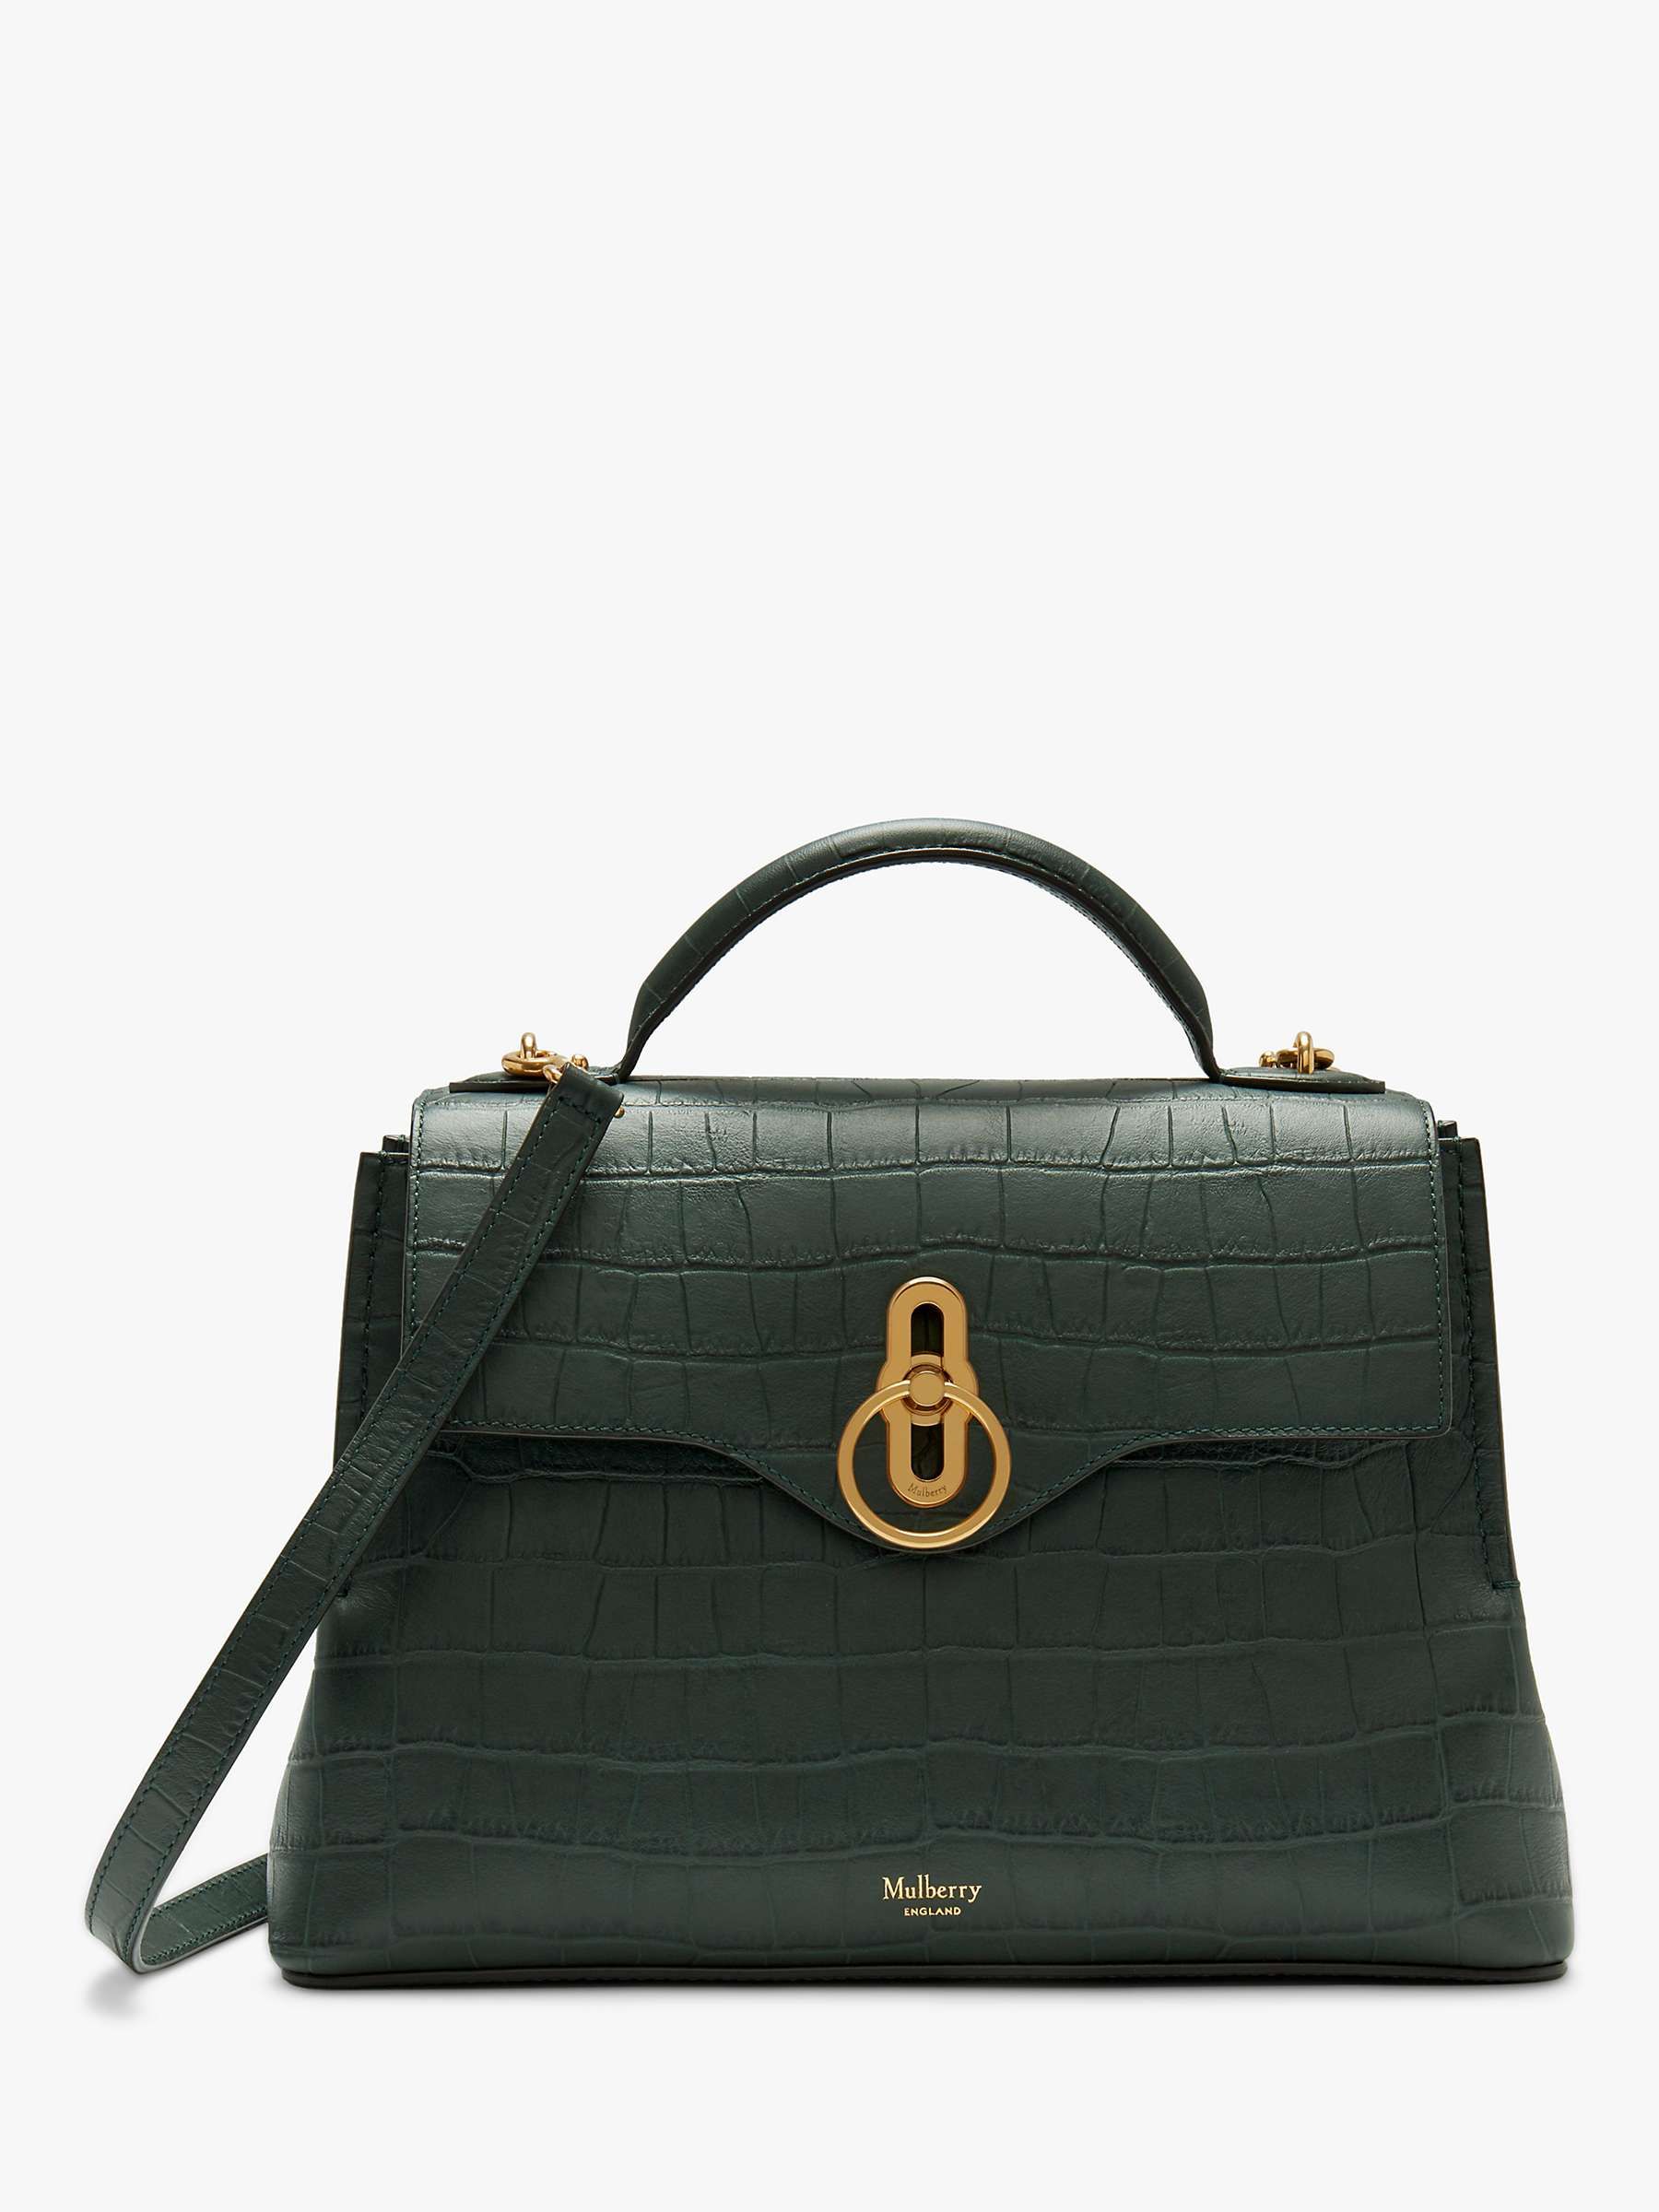 gucci bags black friday sale